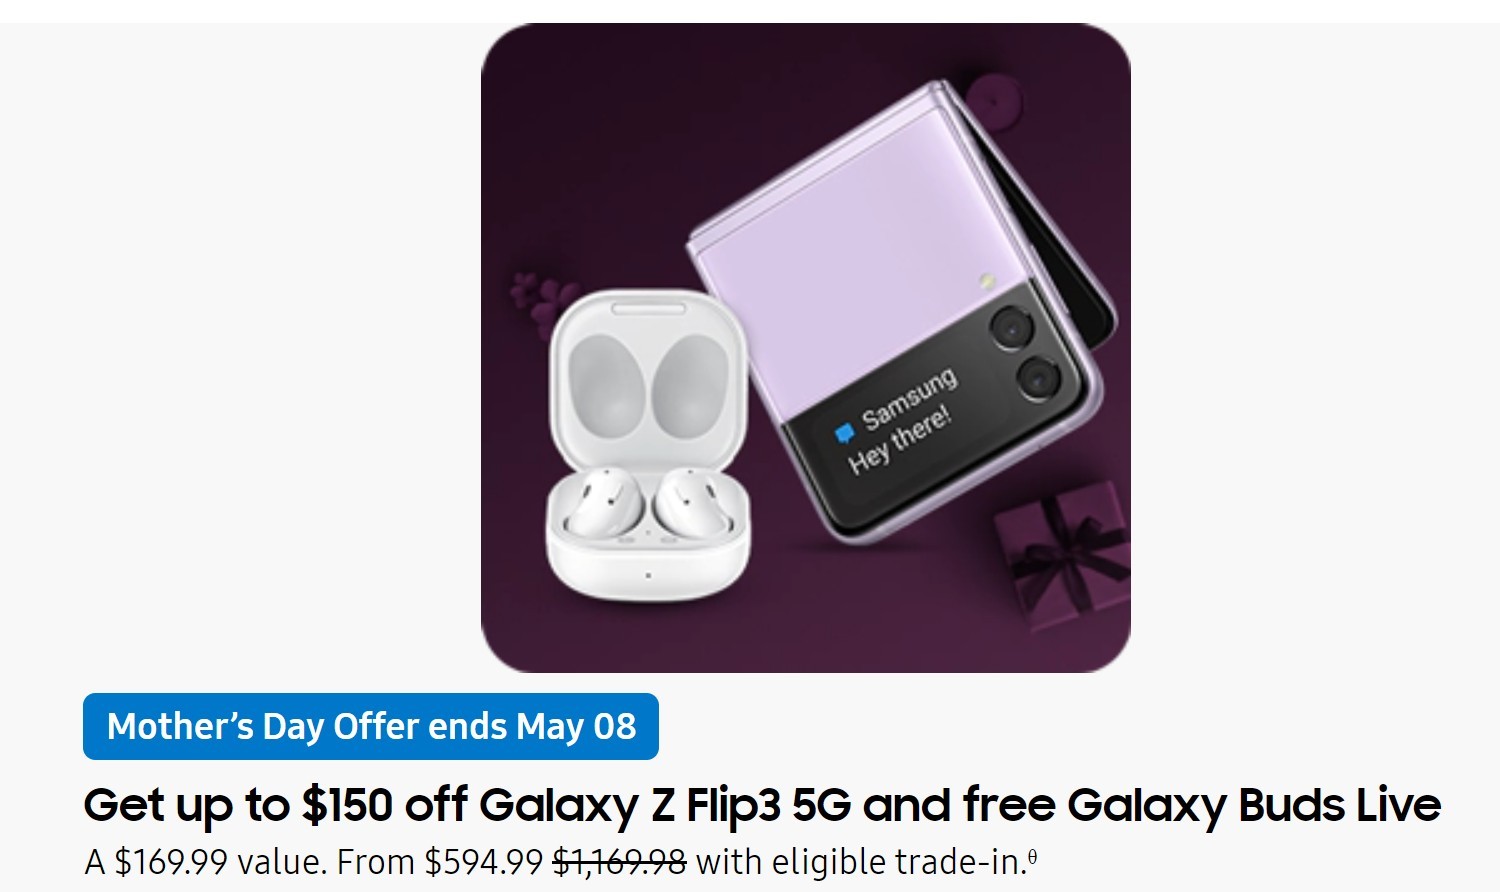 Samsung USA Mother's Day offers include free memory upgrades, Galaxy Buds, and Watches